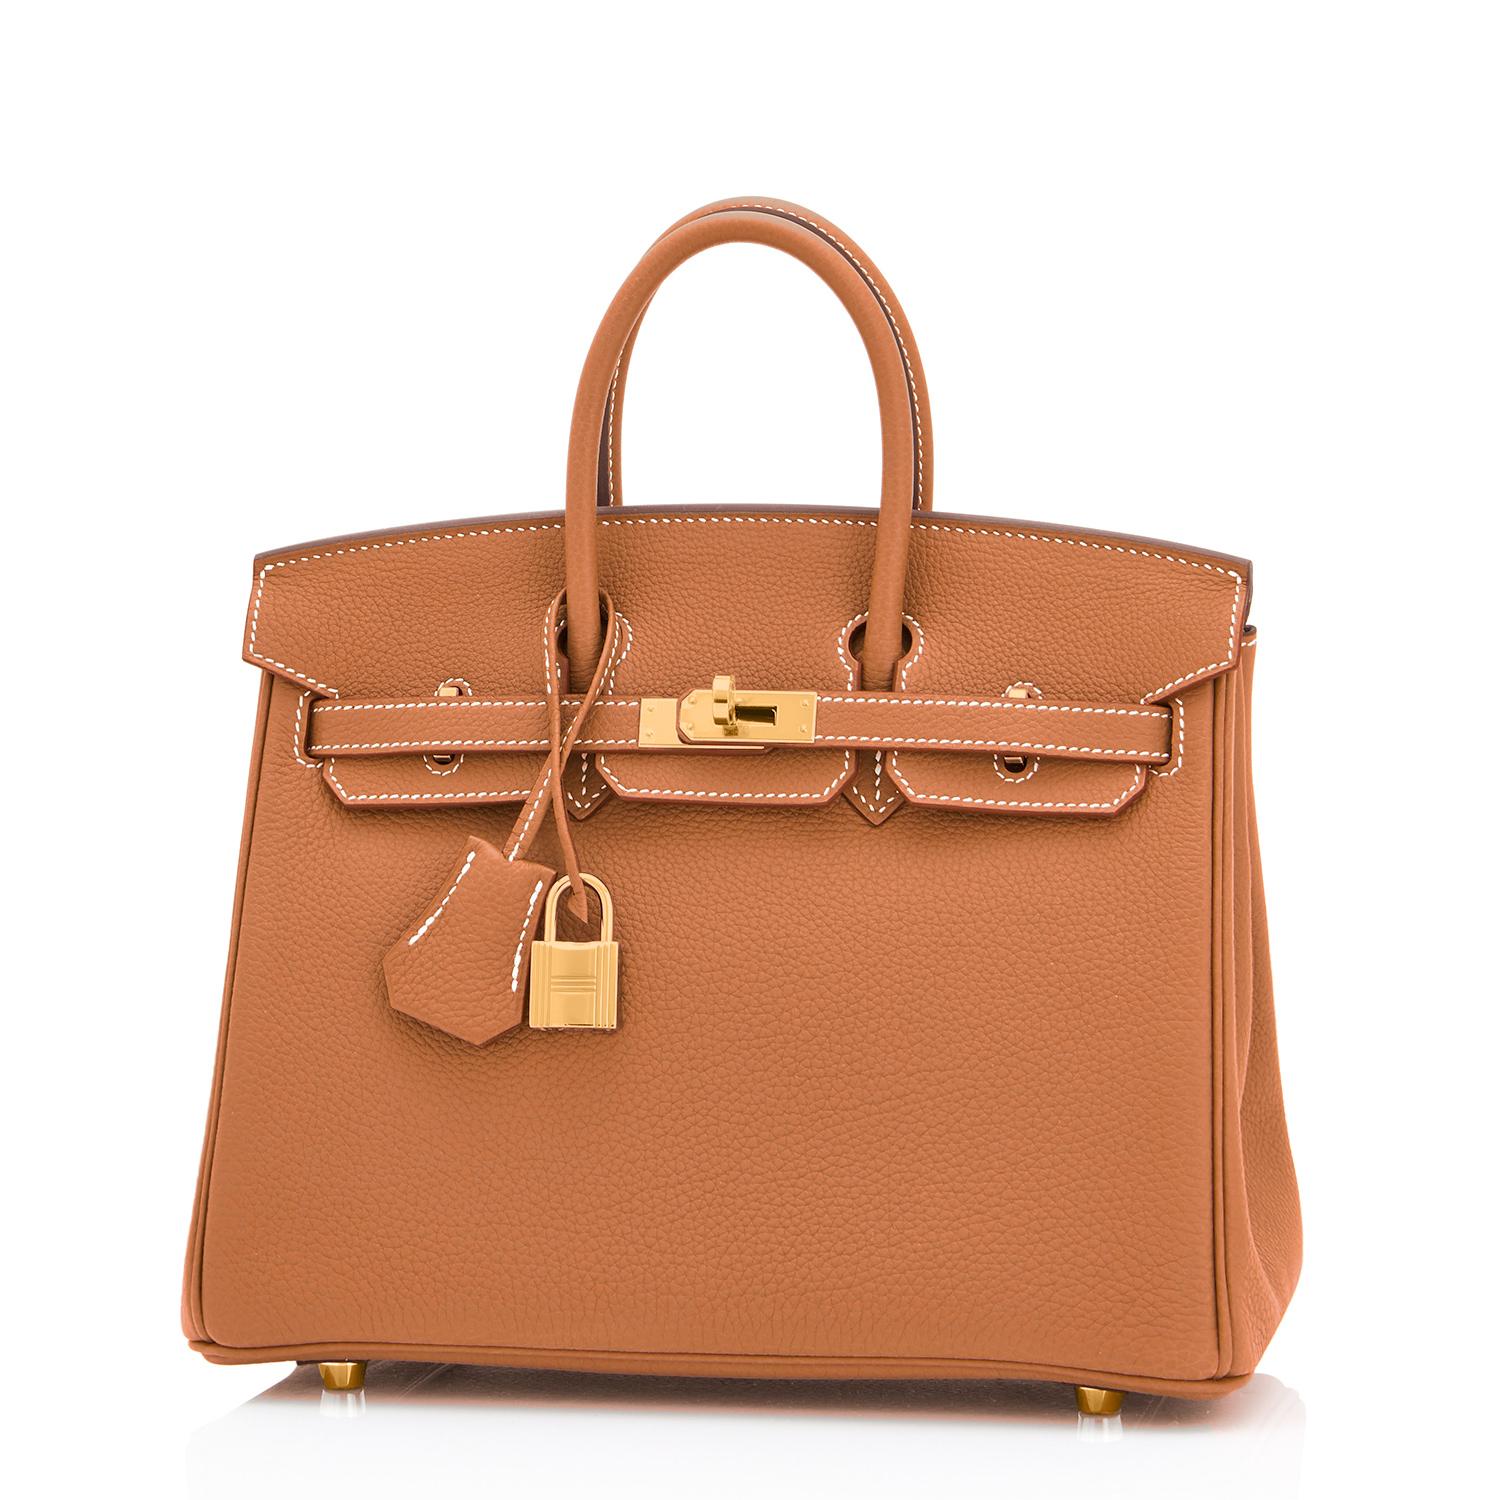 Hermes Birkin 25 Gold Camel Tan Bag Togo Gold Hardware Y Stamp, 2020
Here it is- the most sought-after, number one requested Birkin of spring summer 2021!
Just purchased from Hermes store; bag bears new interior 2020 Y Stamp.
Brand New in Box. Store